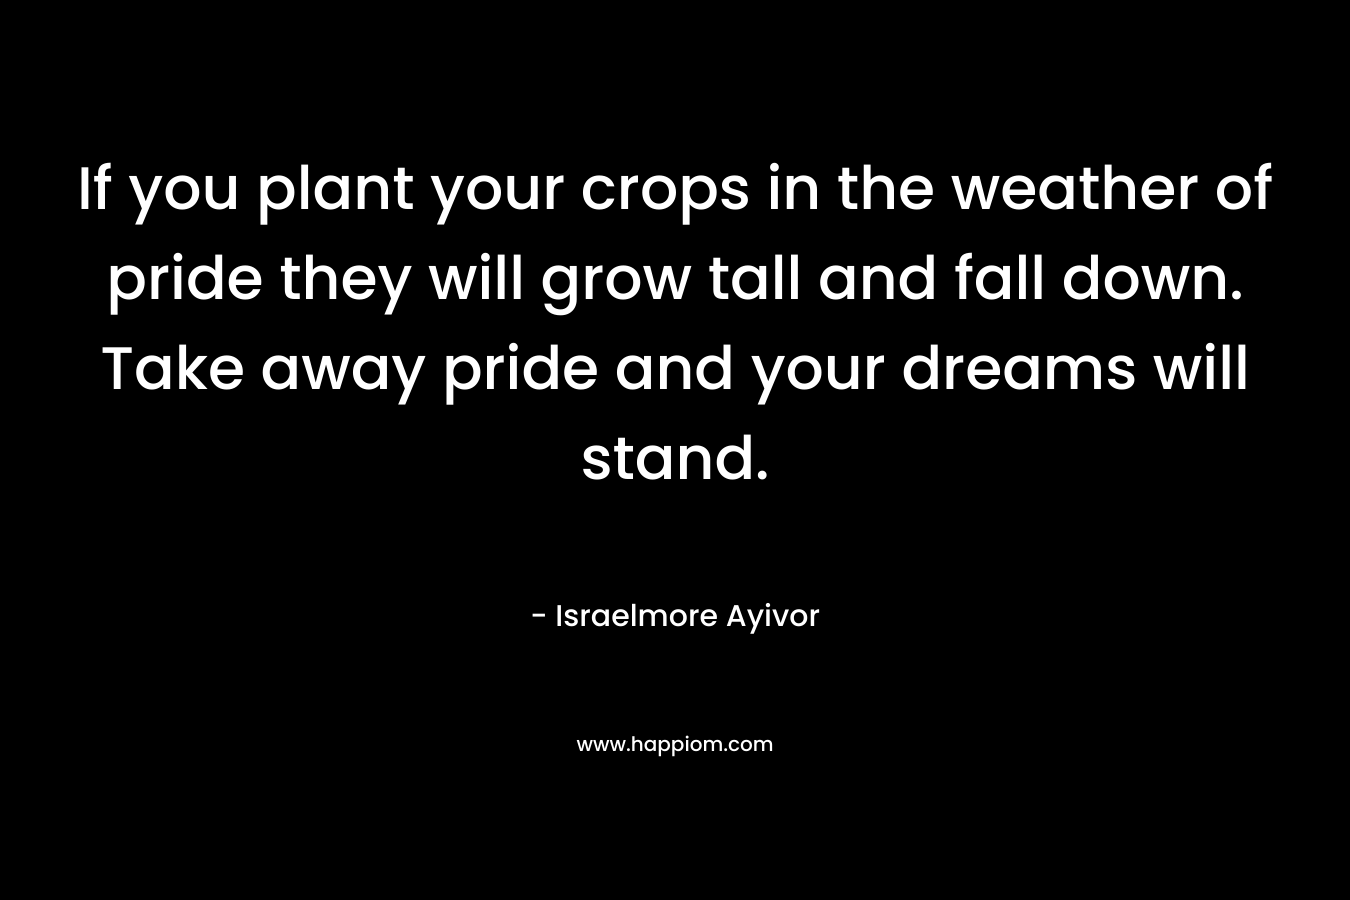 If you plant your crops in the weather of pride they will grow tall and fall down. Take away pride and your dreams will stand. – Israelmore Ayivor